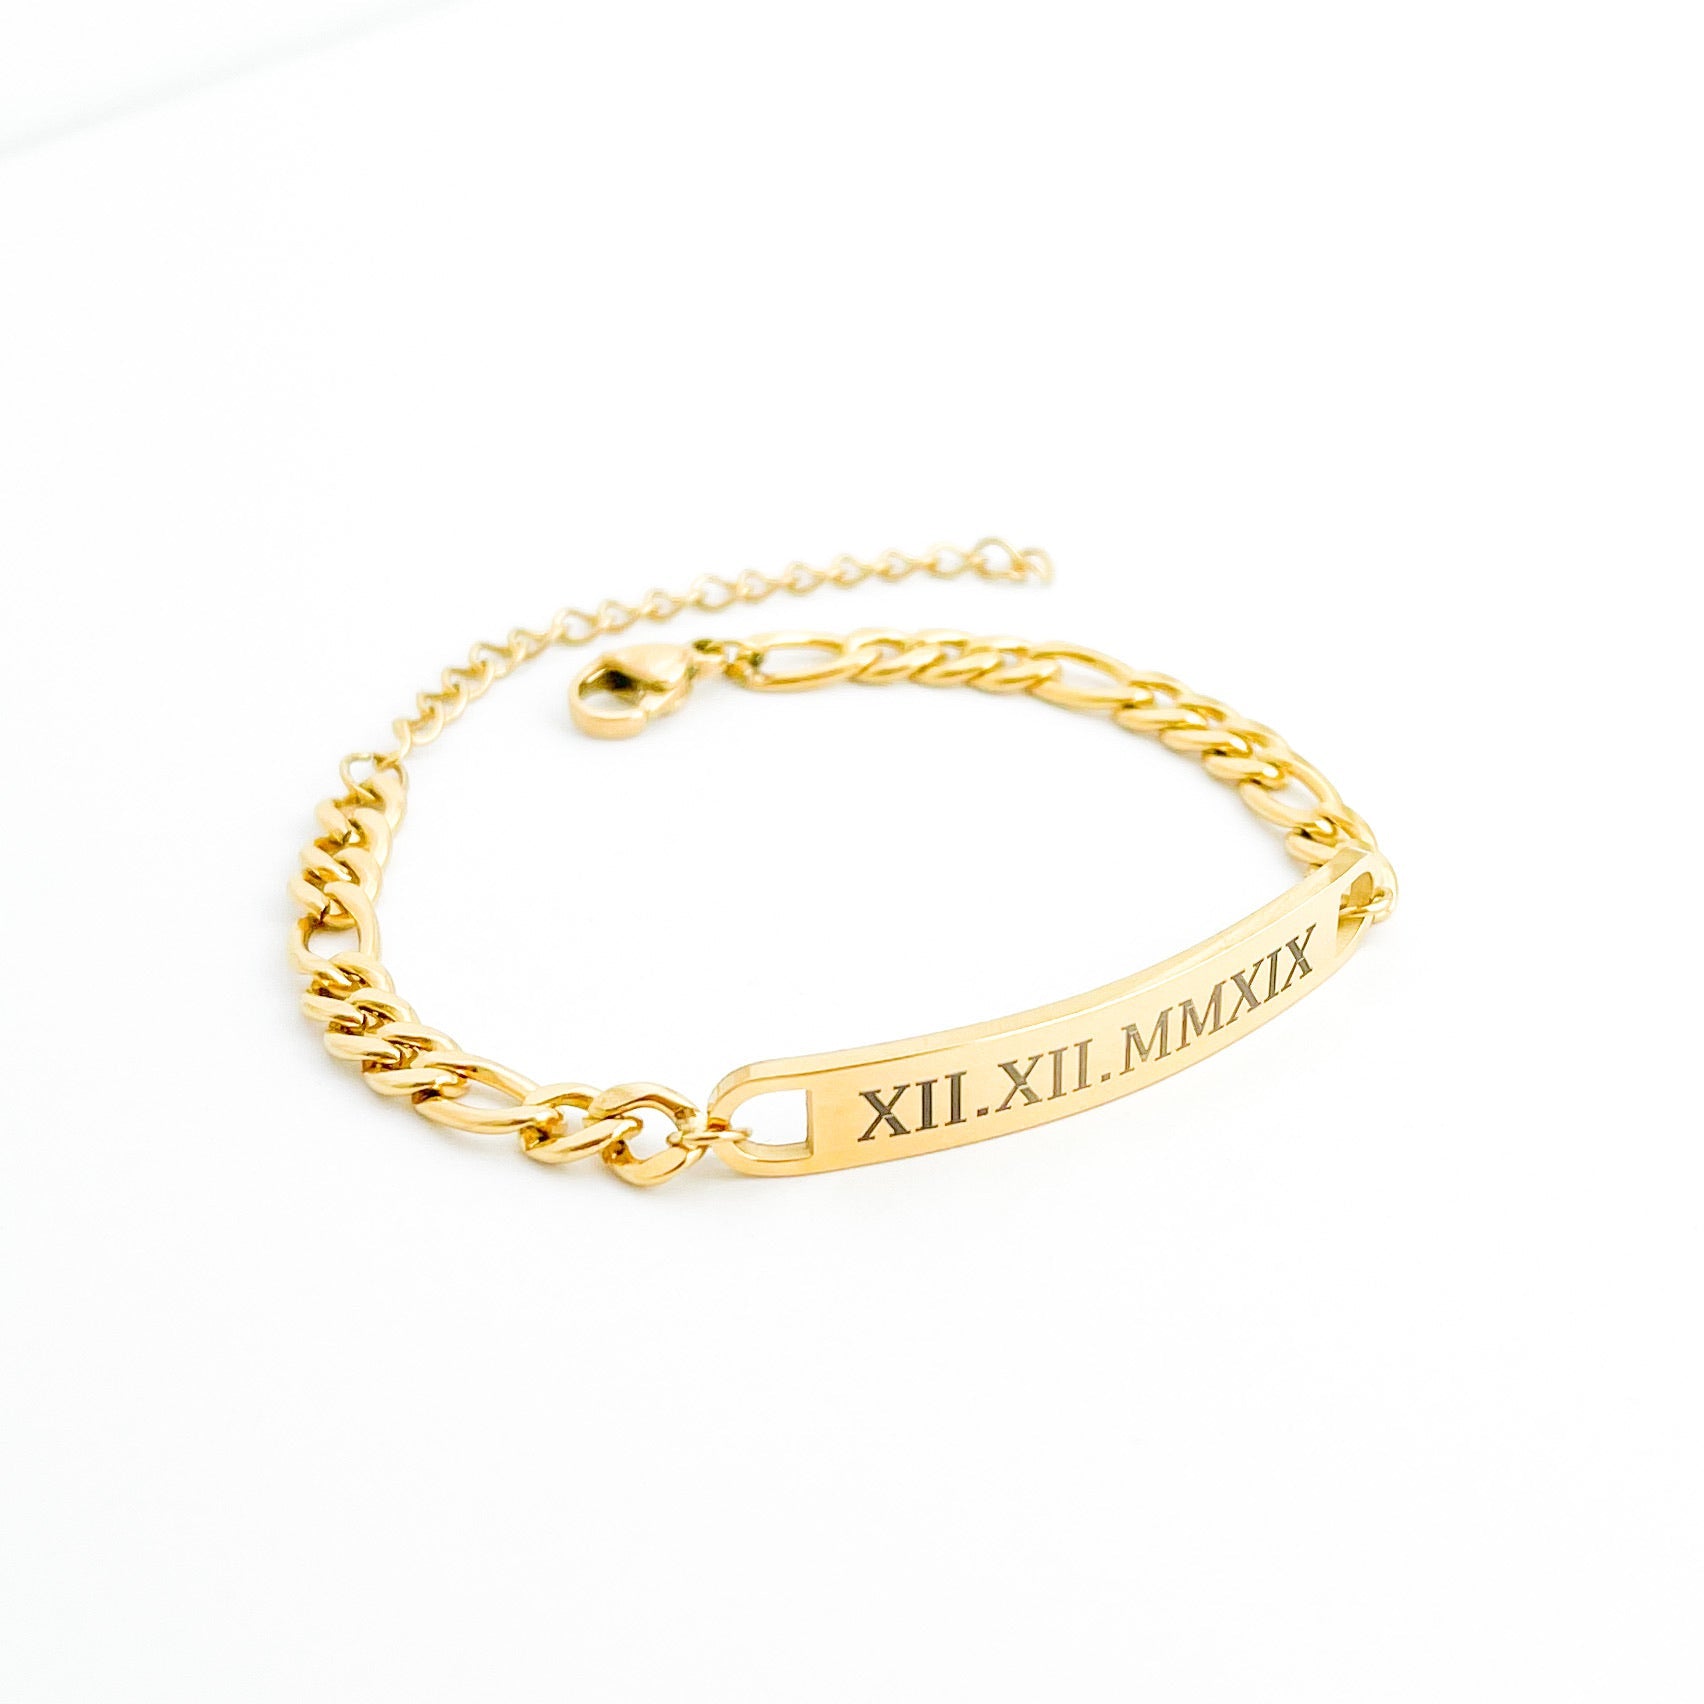 Customized Figaro Chain Bracelet - Flaire & Co.